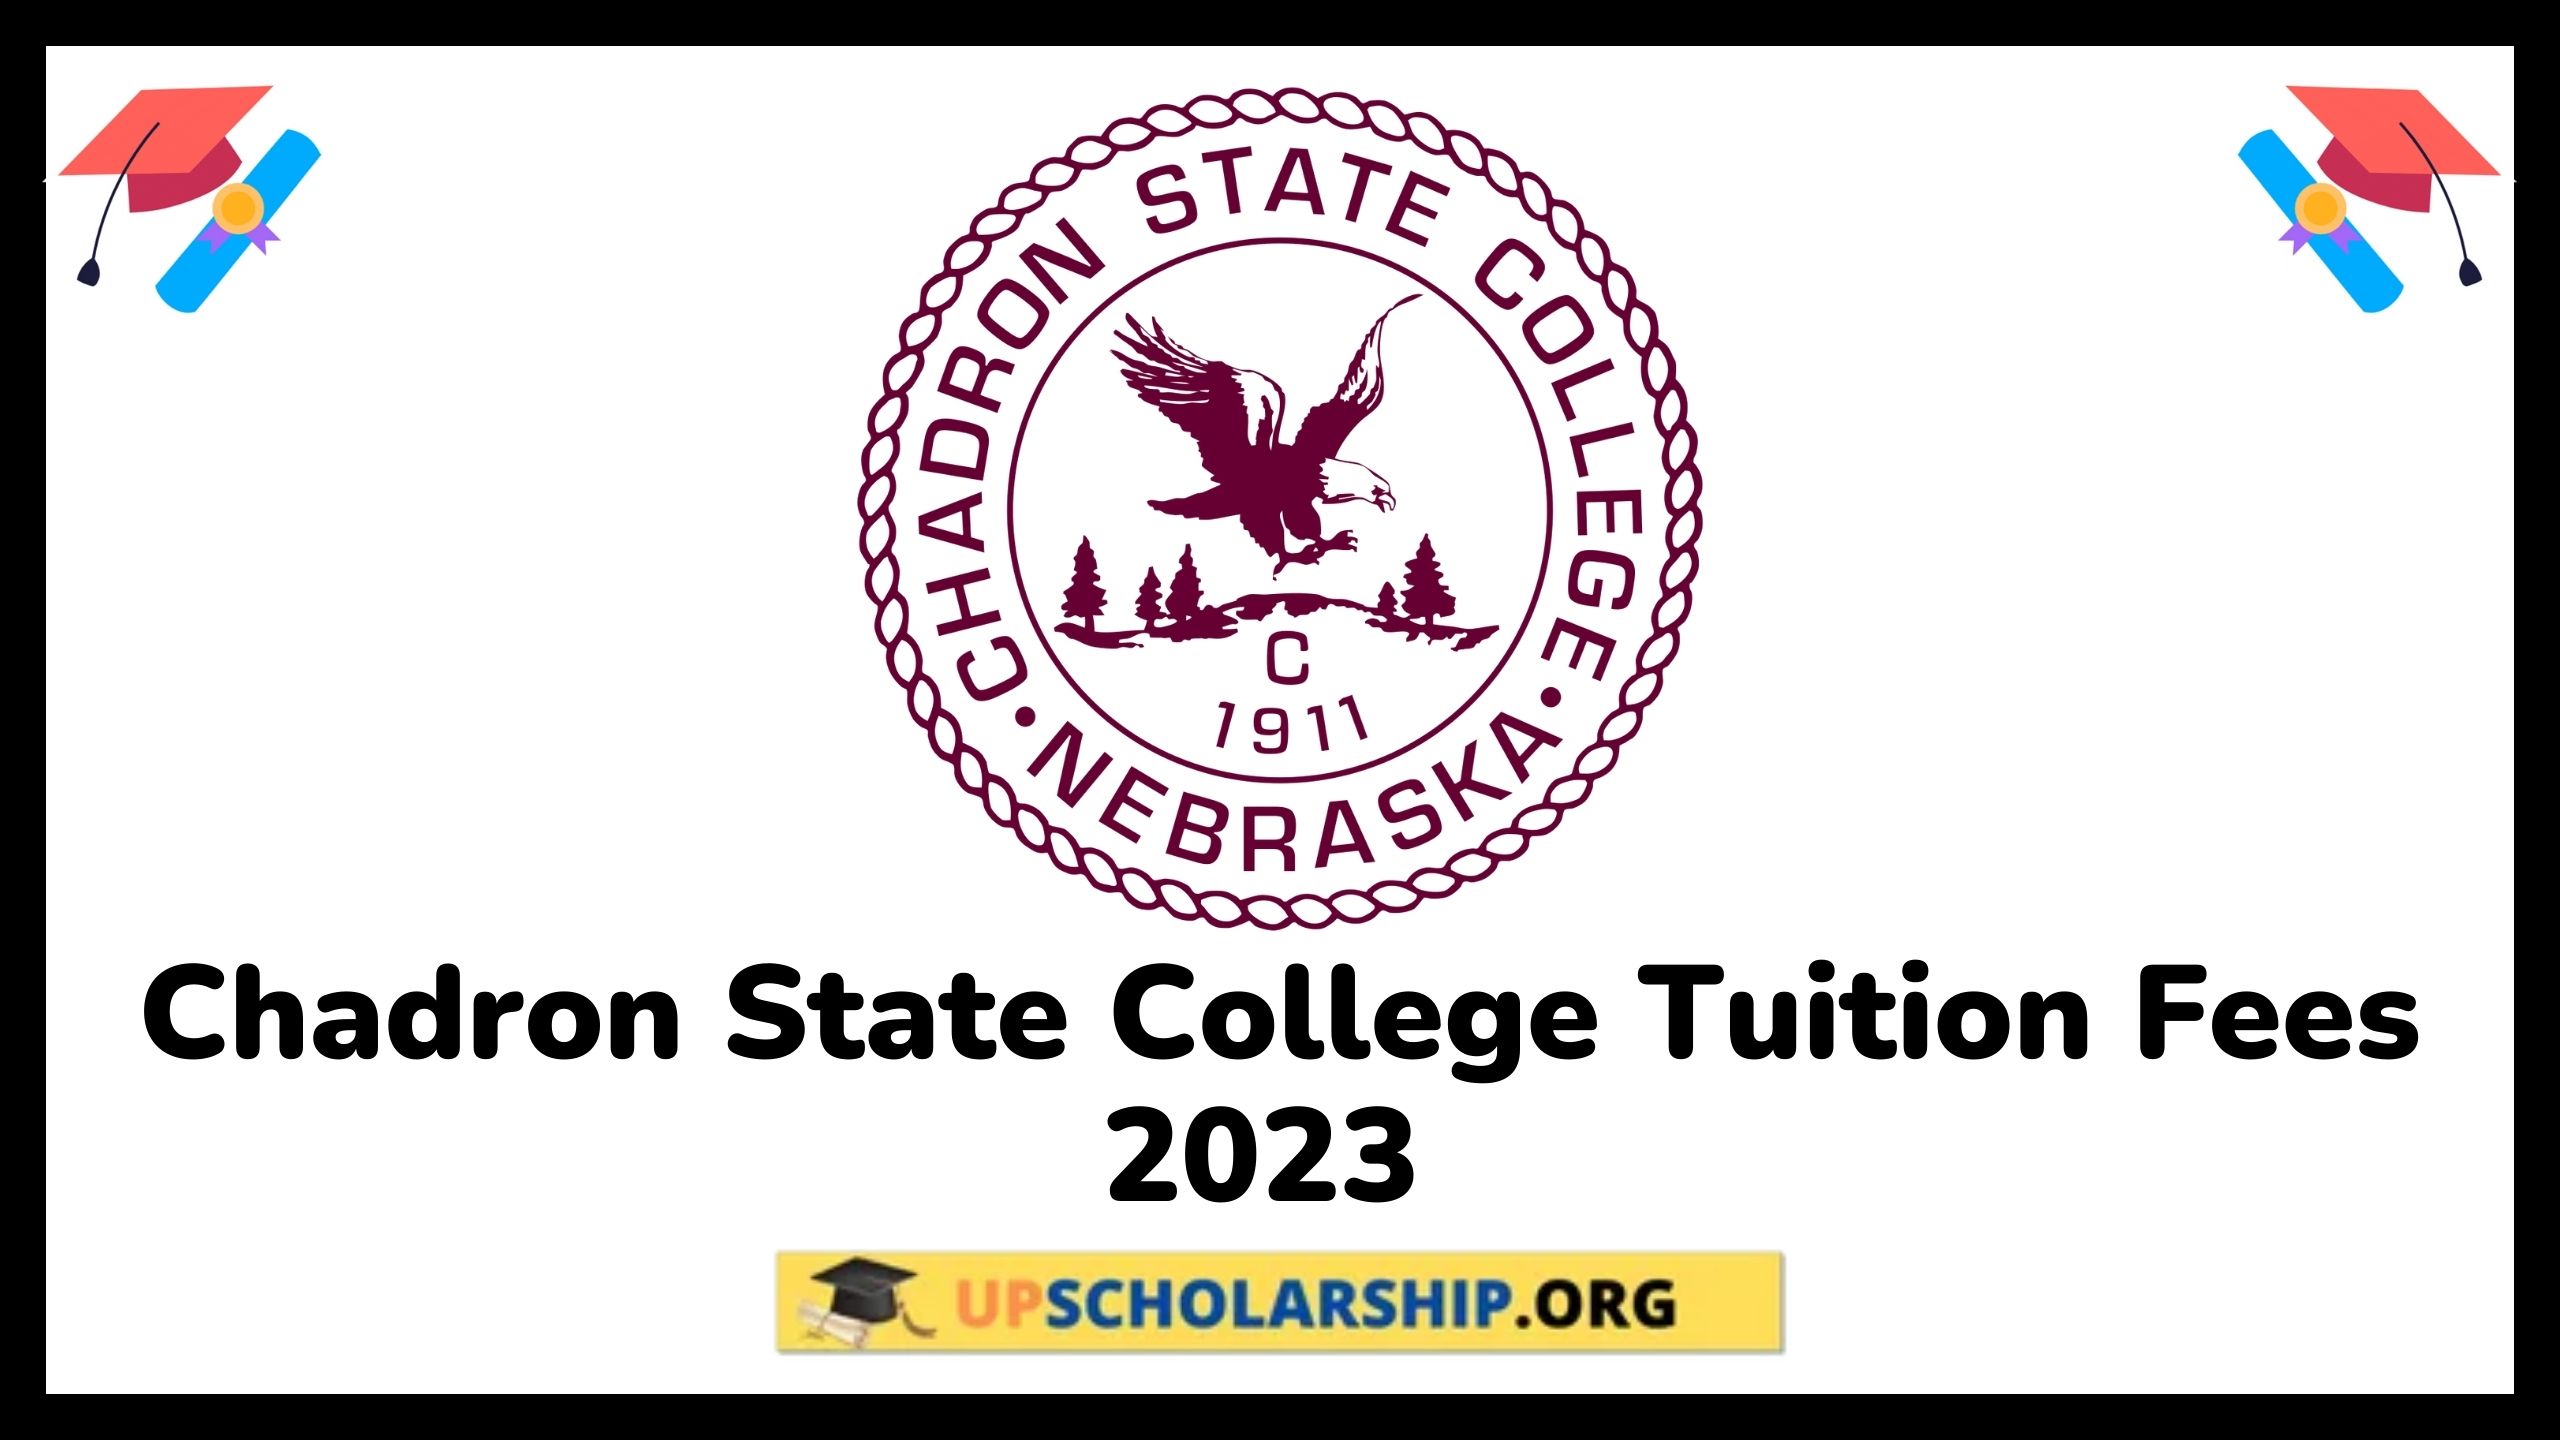 Chadron State College Tuition Fees 2023